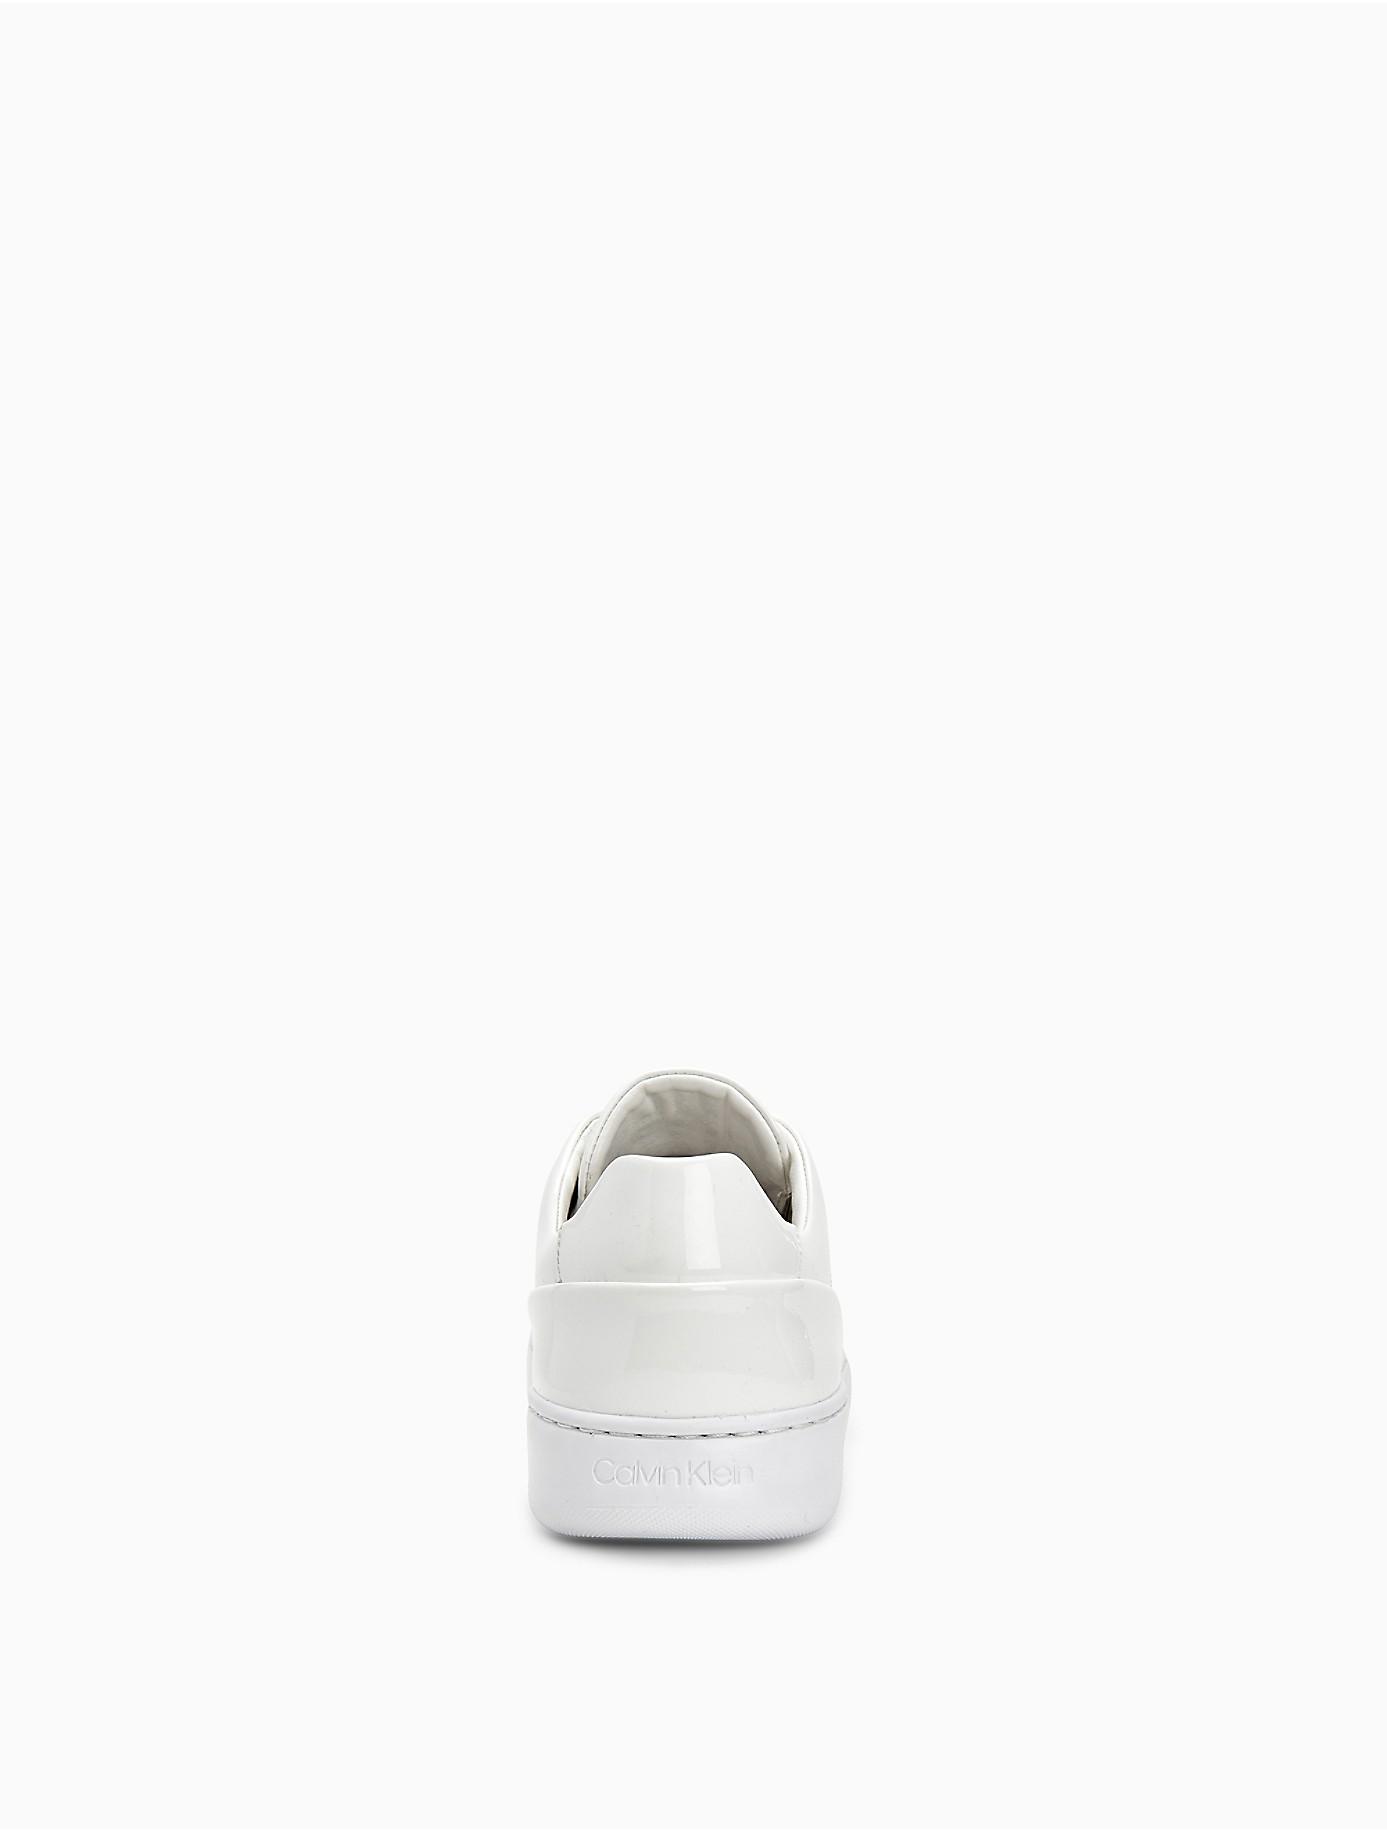 Calvin Klein Fuego Patent Leather Sneaker in White for Men | Lyst